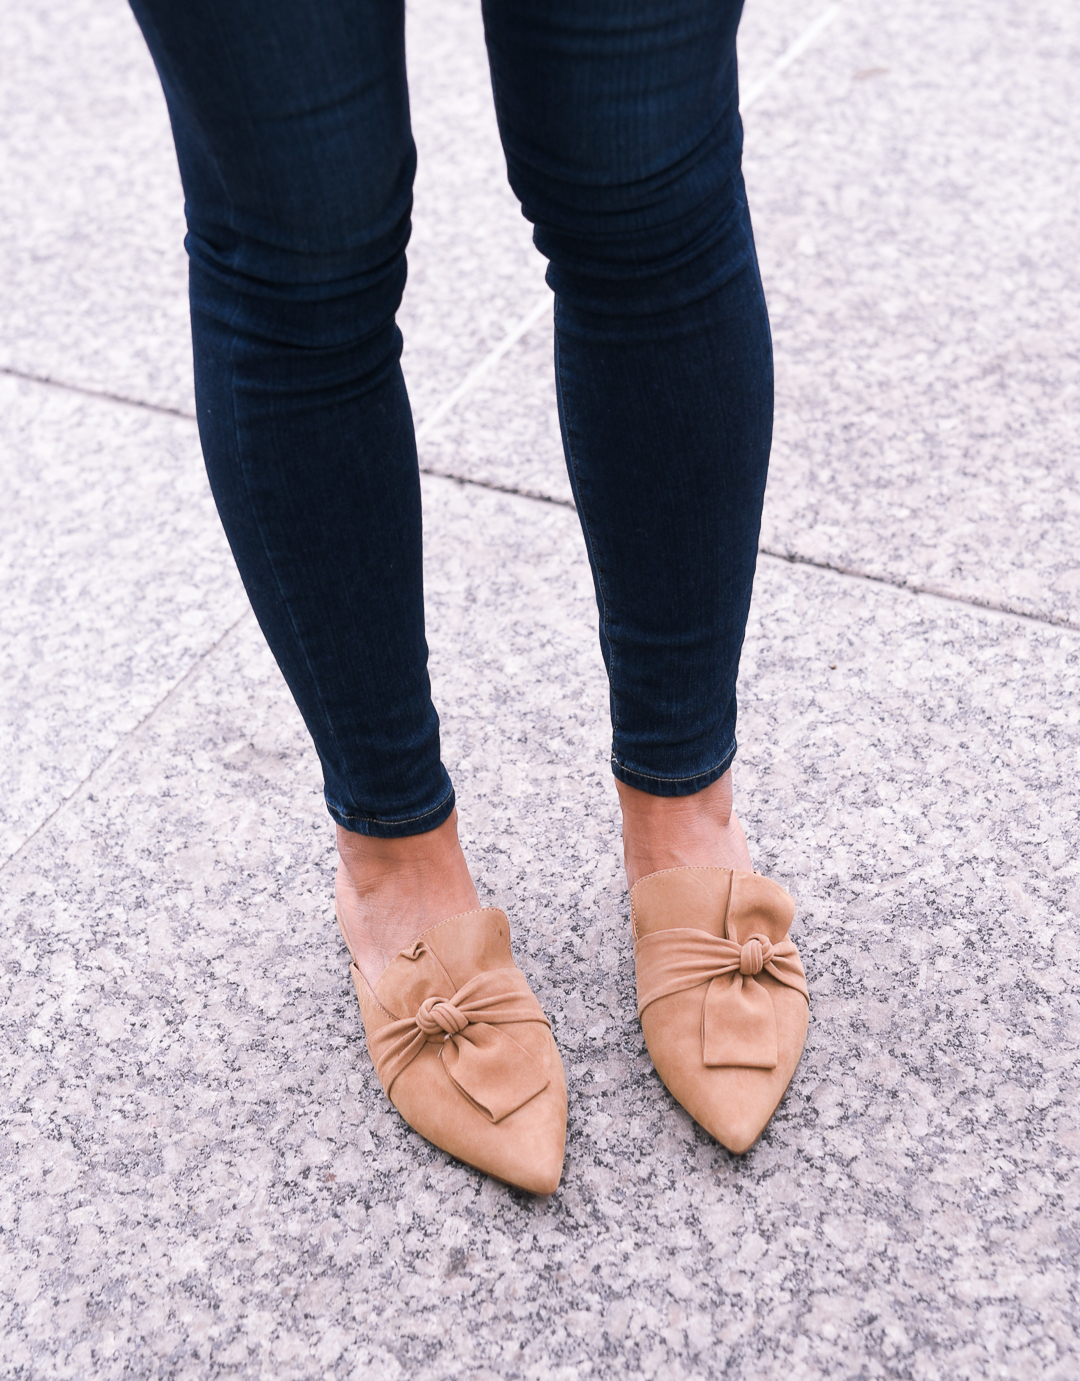 tan pointed tow mules from 6pm - tahari bow mules by Chicago fashion blogger Visions of Vogue